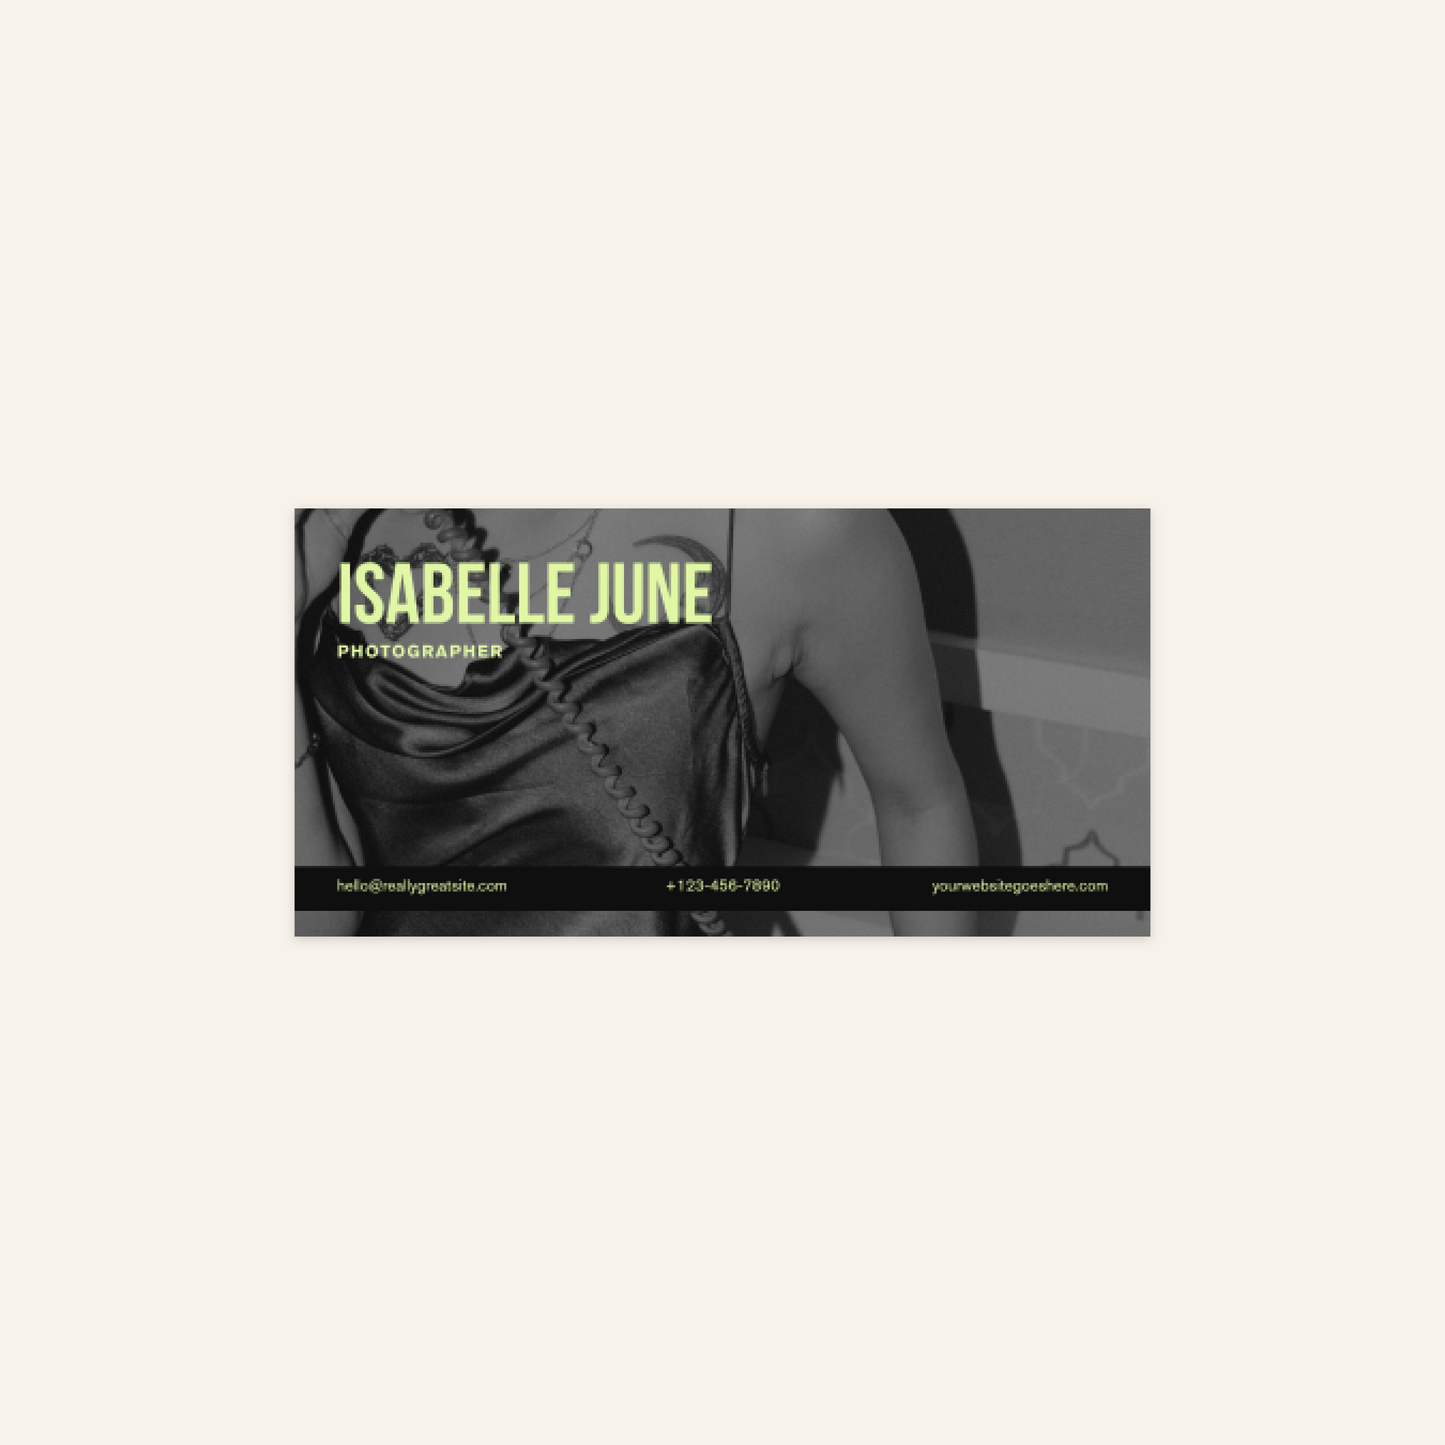 Isabelle June - Email Signature Template